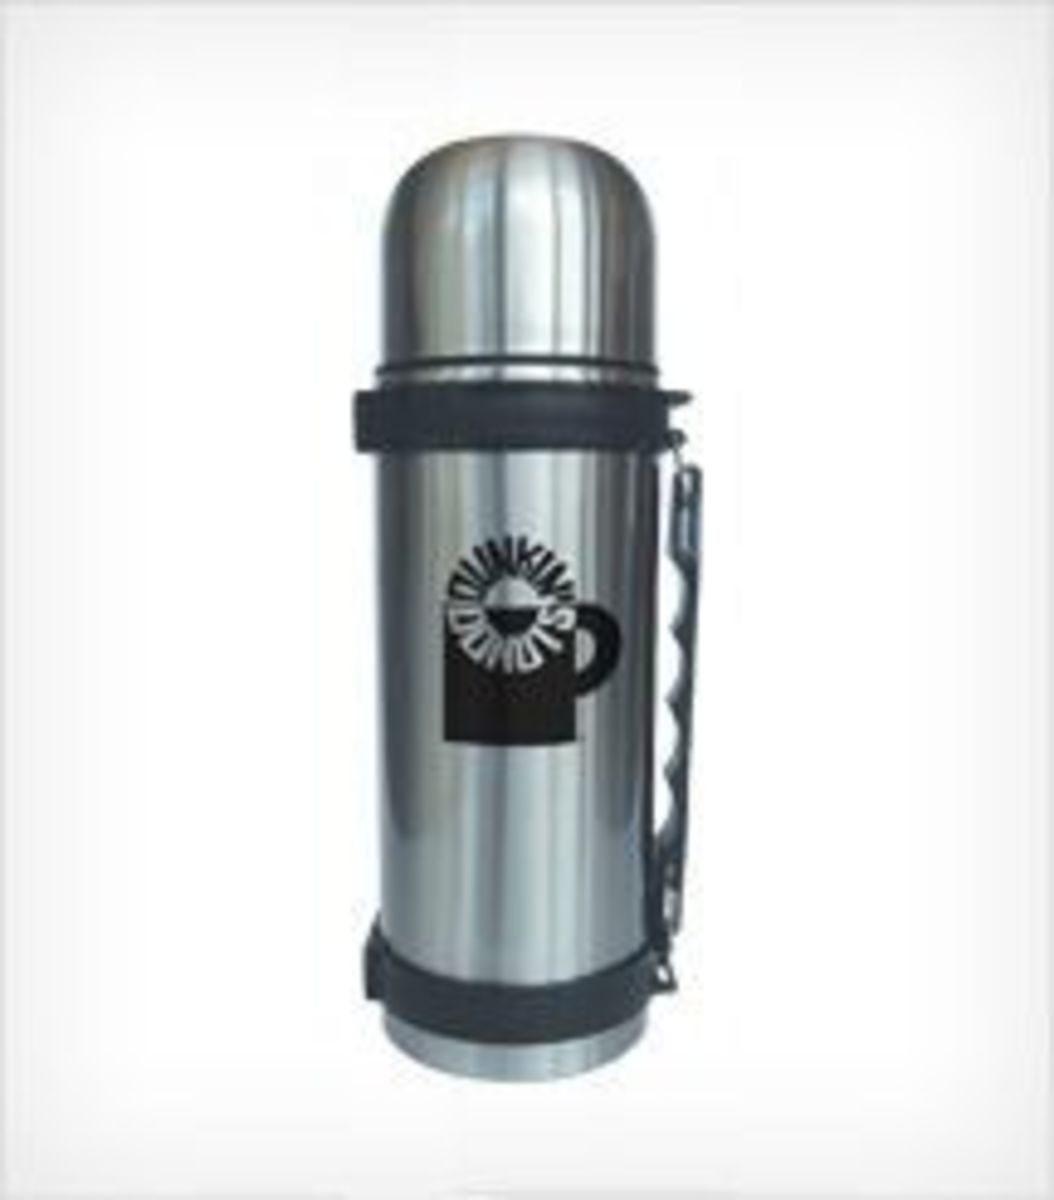 Dunkin Donuts thermos